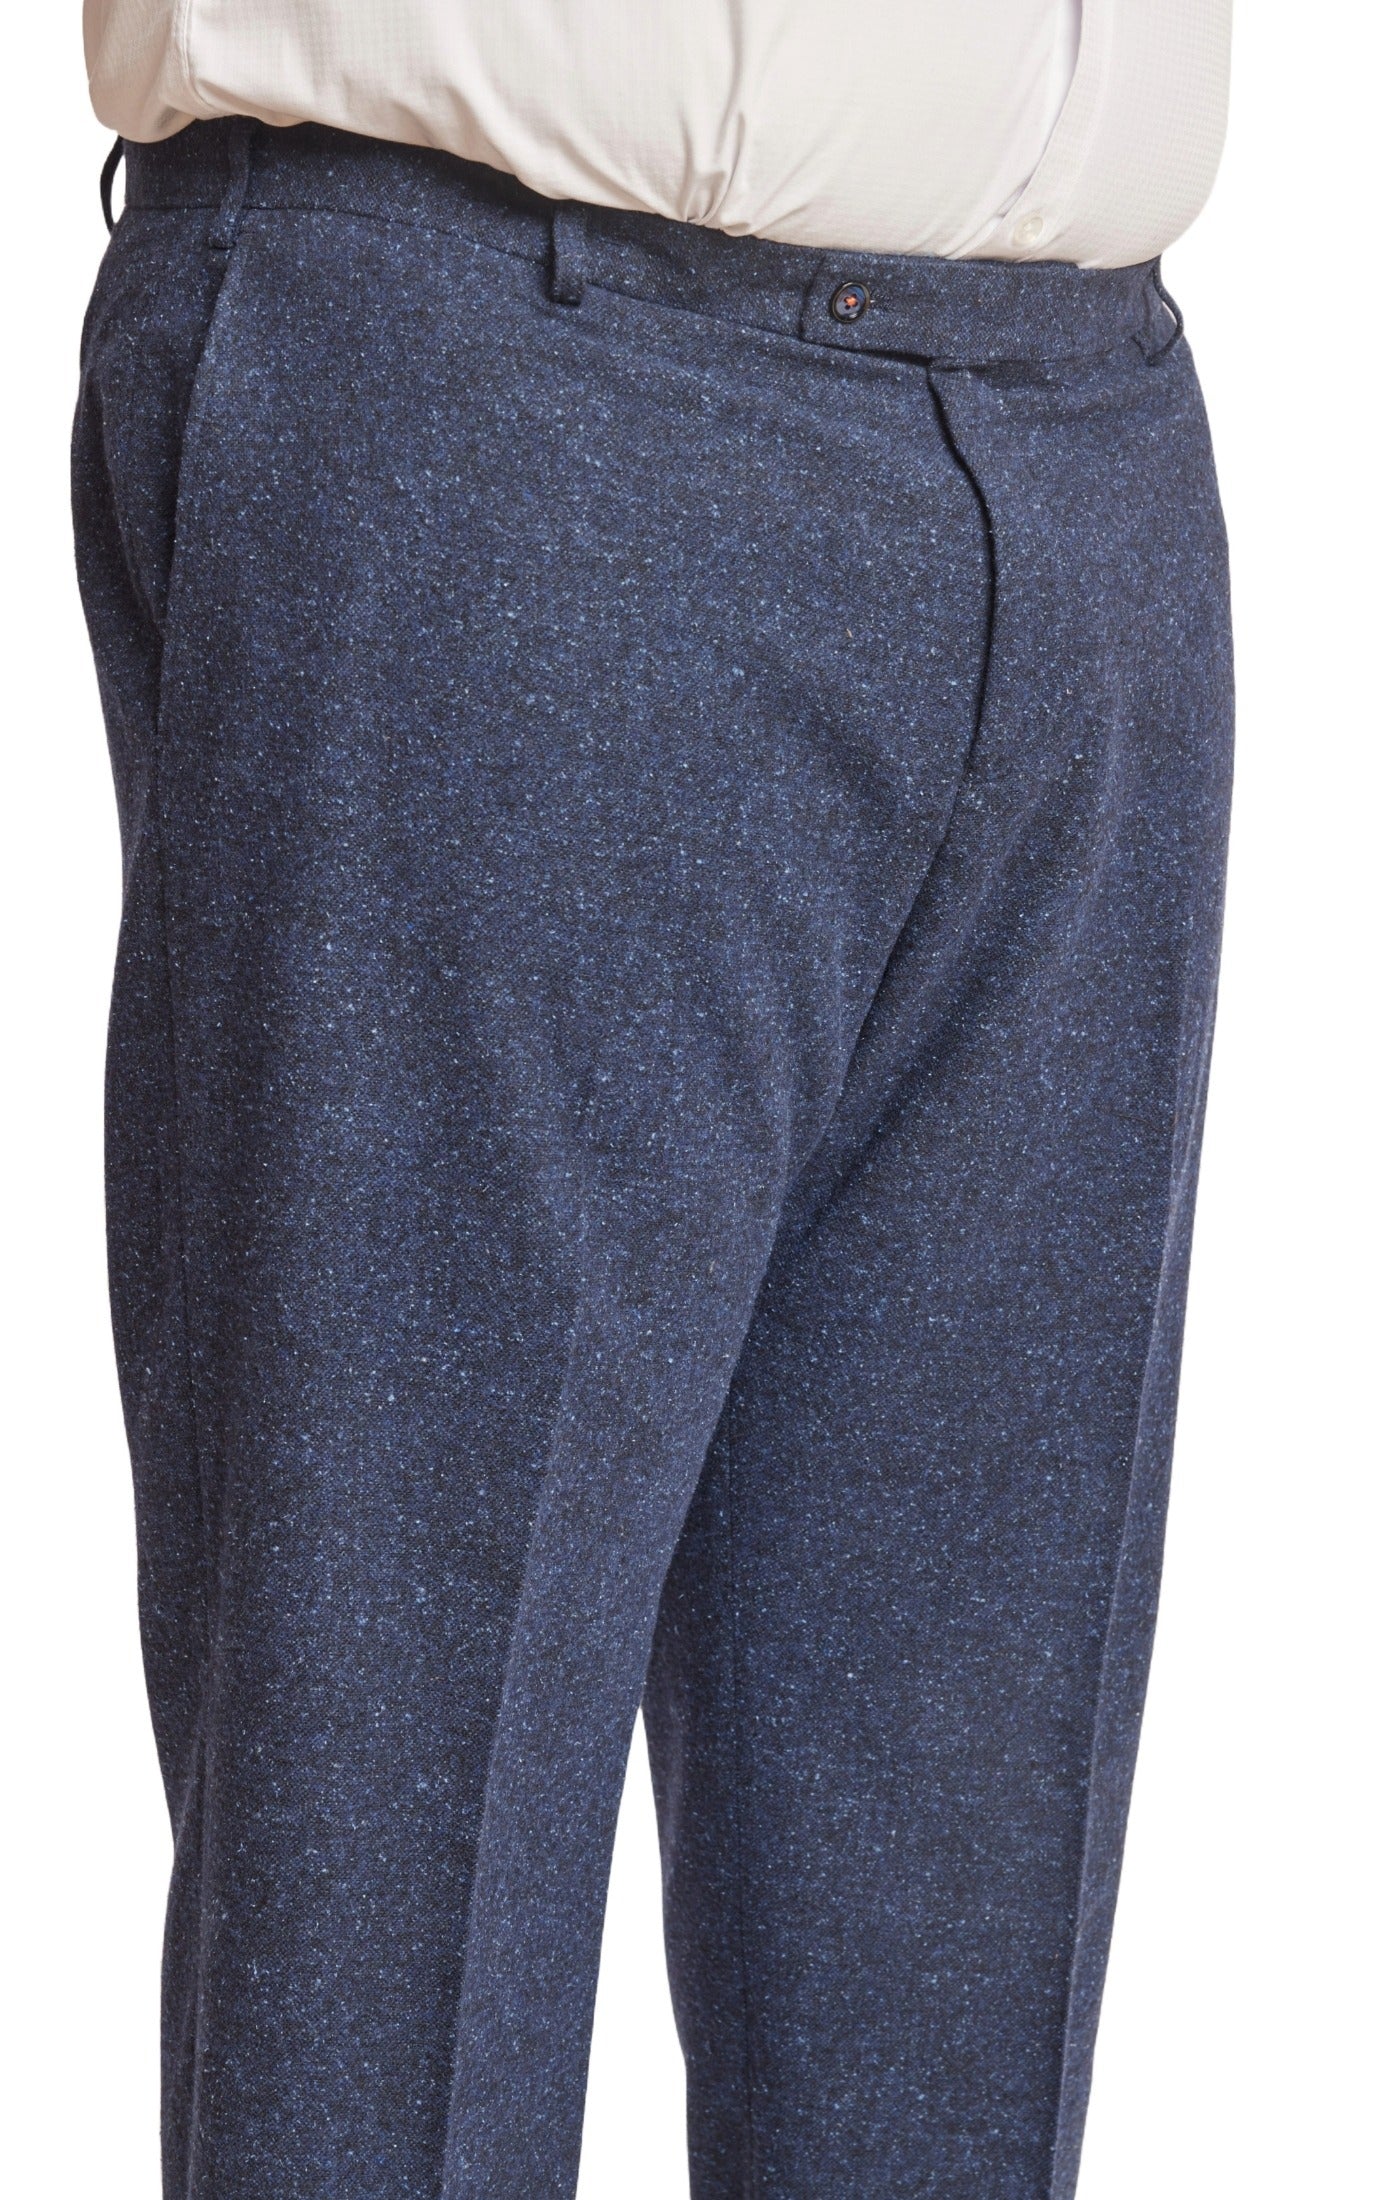 Big & Tall Downing Pants - Blue Speckle